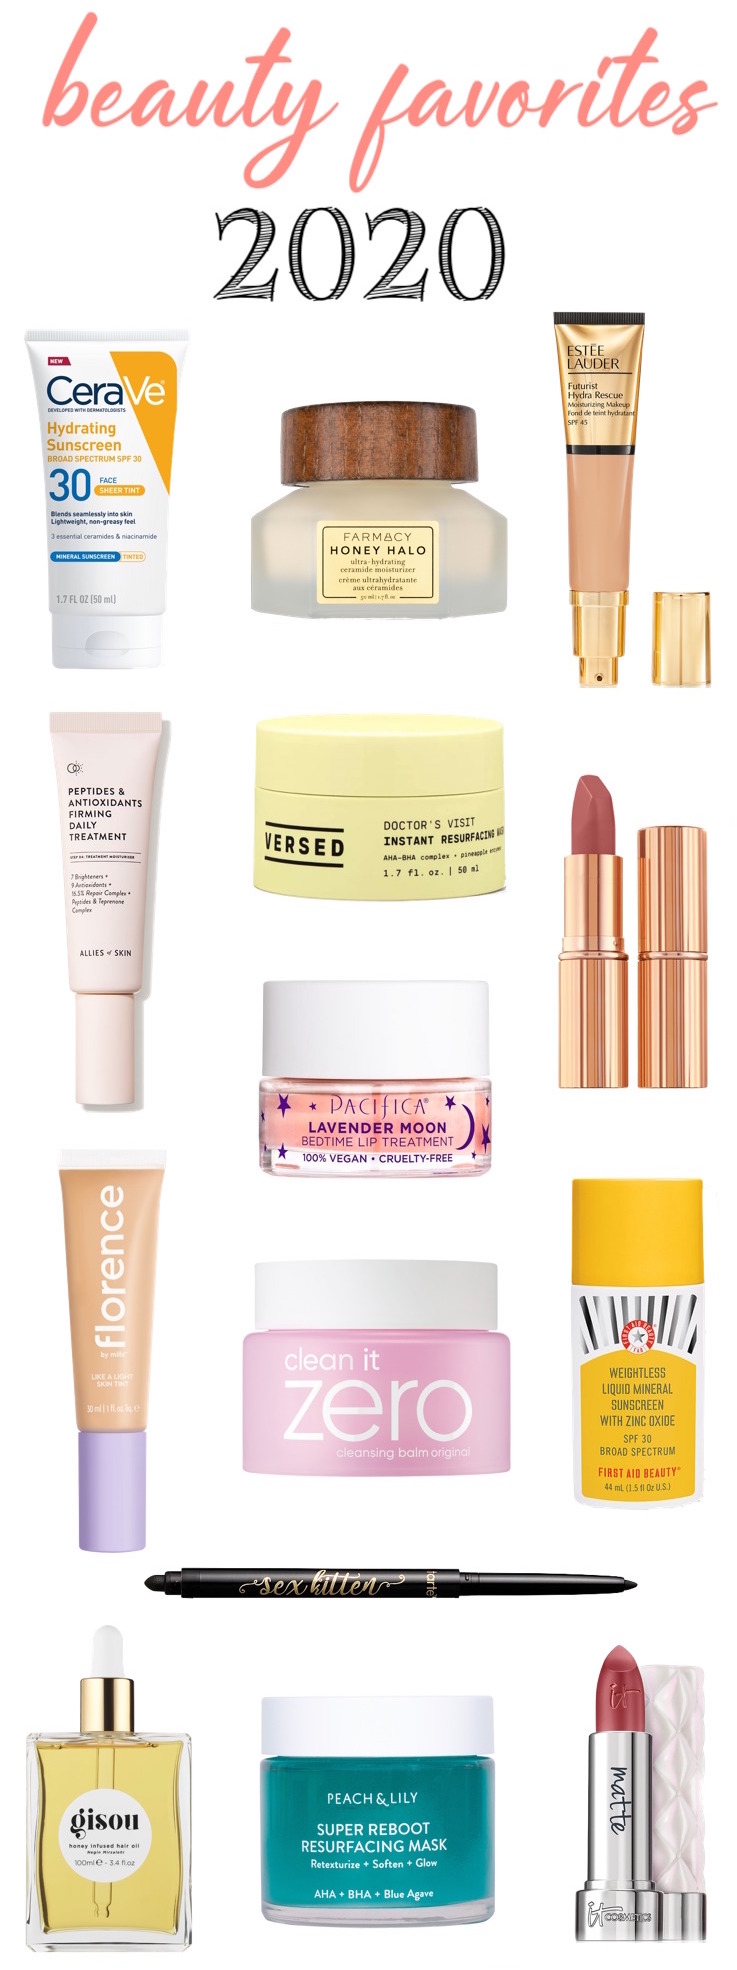 Best beauty products 2020 roundup! My top skincare and makeup favorites that really stood out and secured a top spot in my beauty stash! 